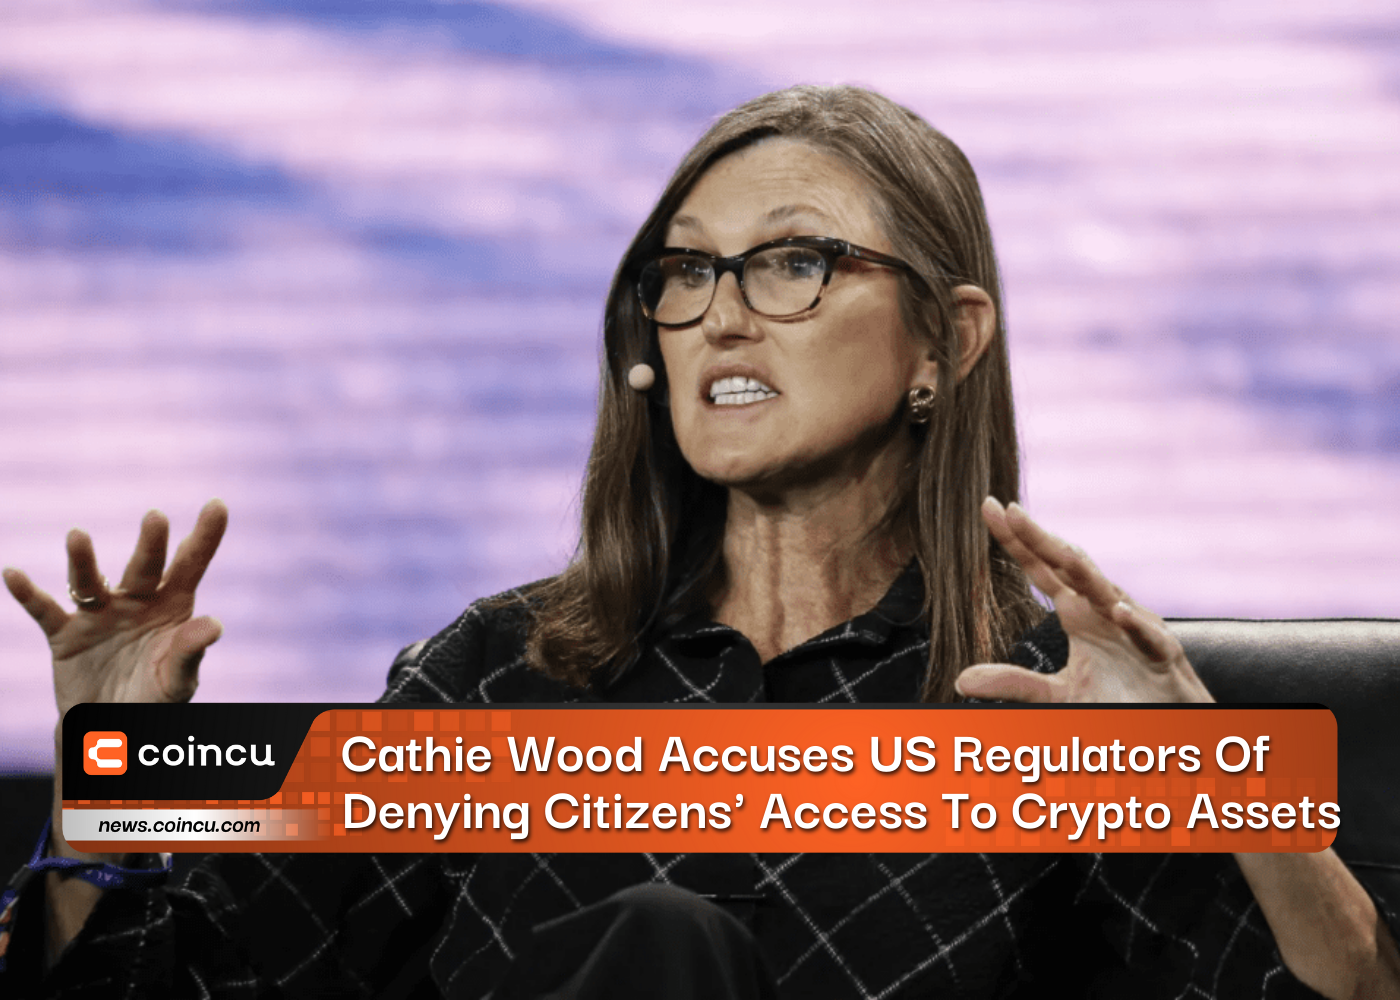 Cathie Wood Accuses US Regulators Of Denying Citizens' Access To Crypto Assets